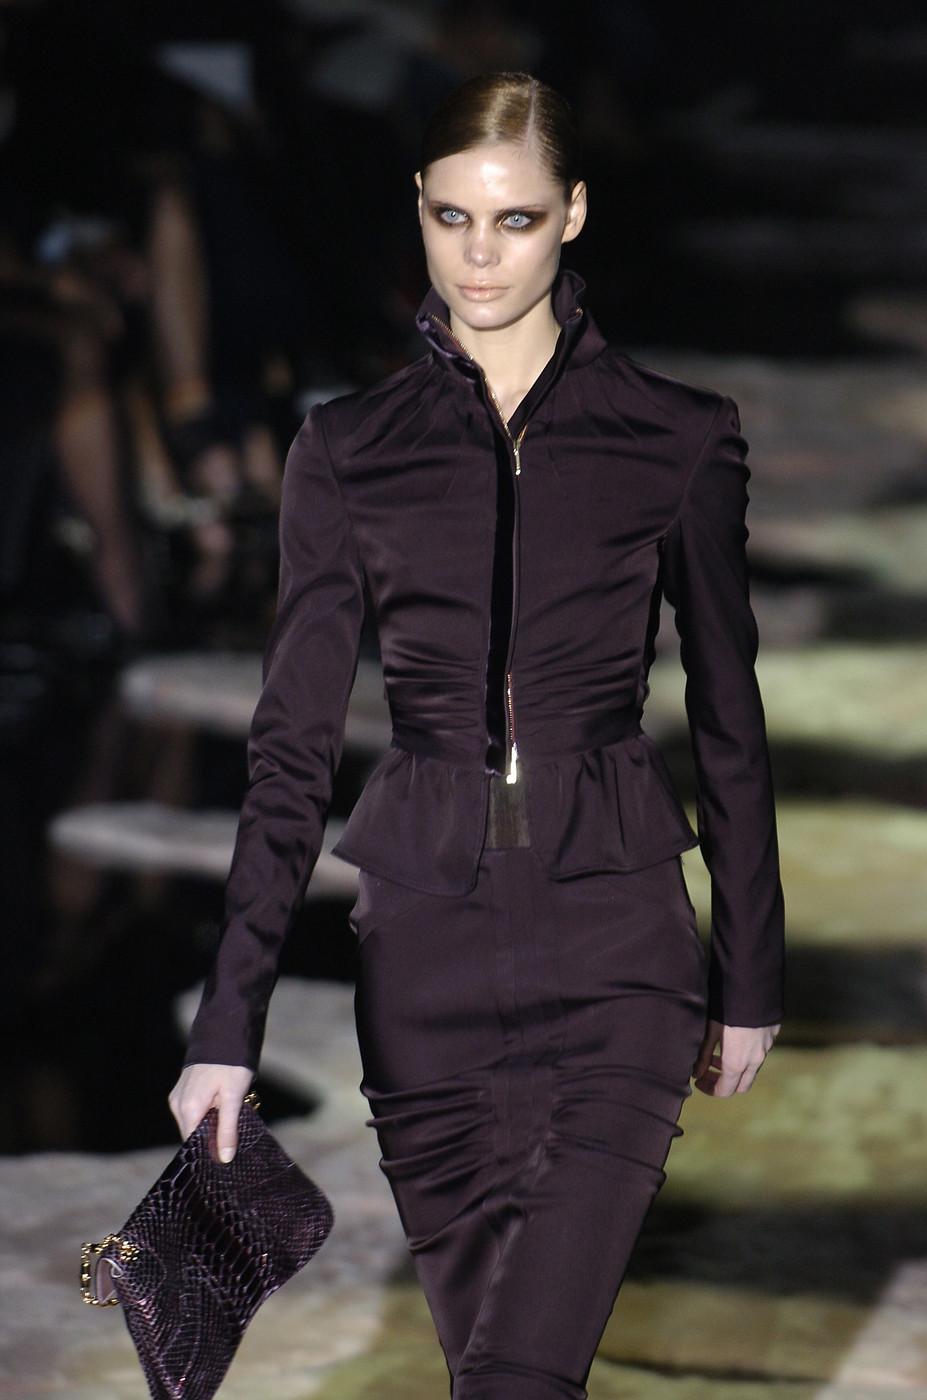 Tom Ford for Gucci Black Stretch Dress Skirt Suit
F/W 2004 Collection - Look # 1
The emotional ending of the Tom Ford era at Gucci was a look back in glamour—a fabulous farewell in which this perfection-obsessed superstar of fashion seized the